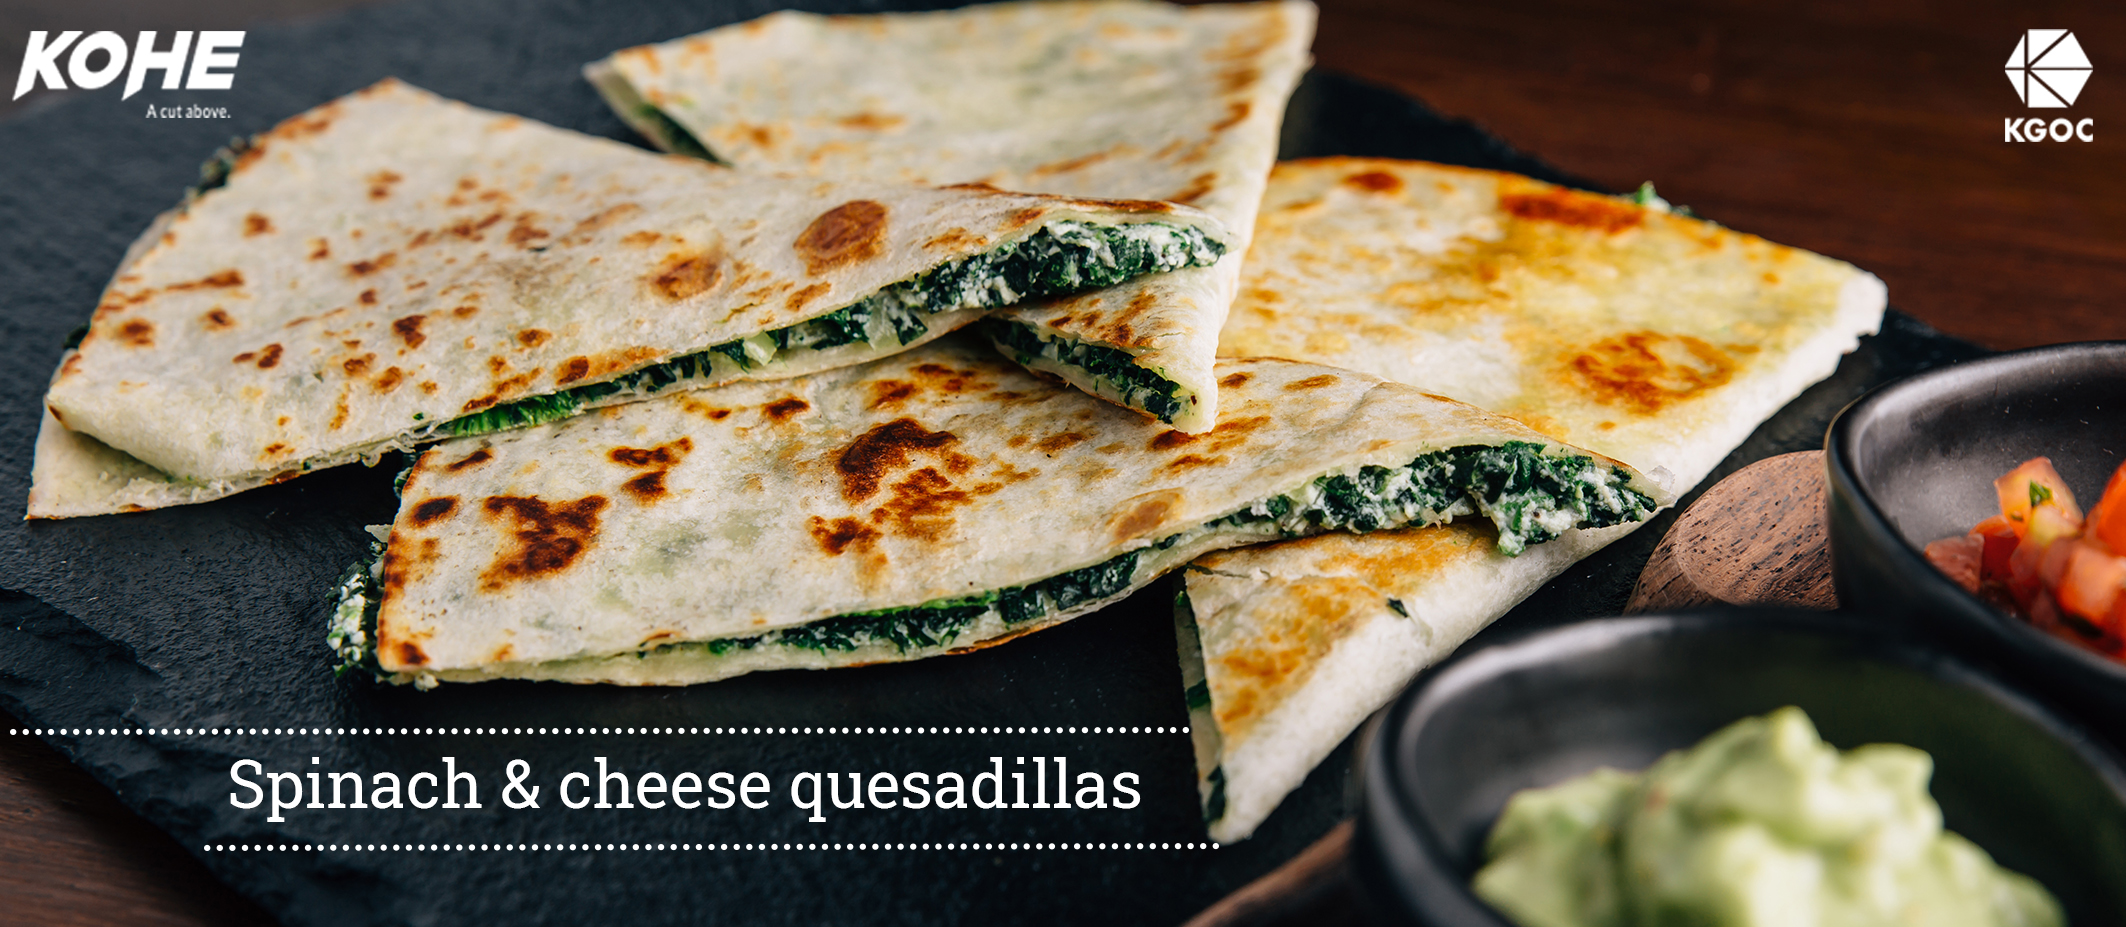 SPINACH AND CHEESE QUESADILLAS by Kritesh Taneja